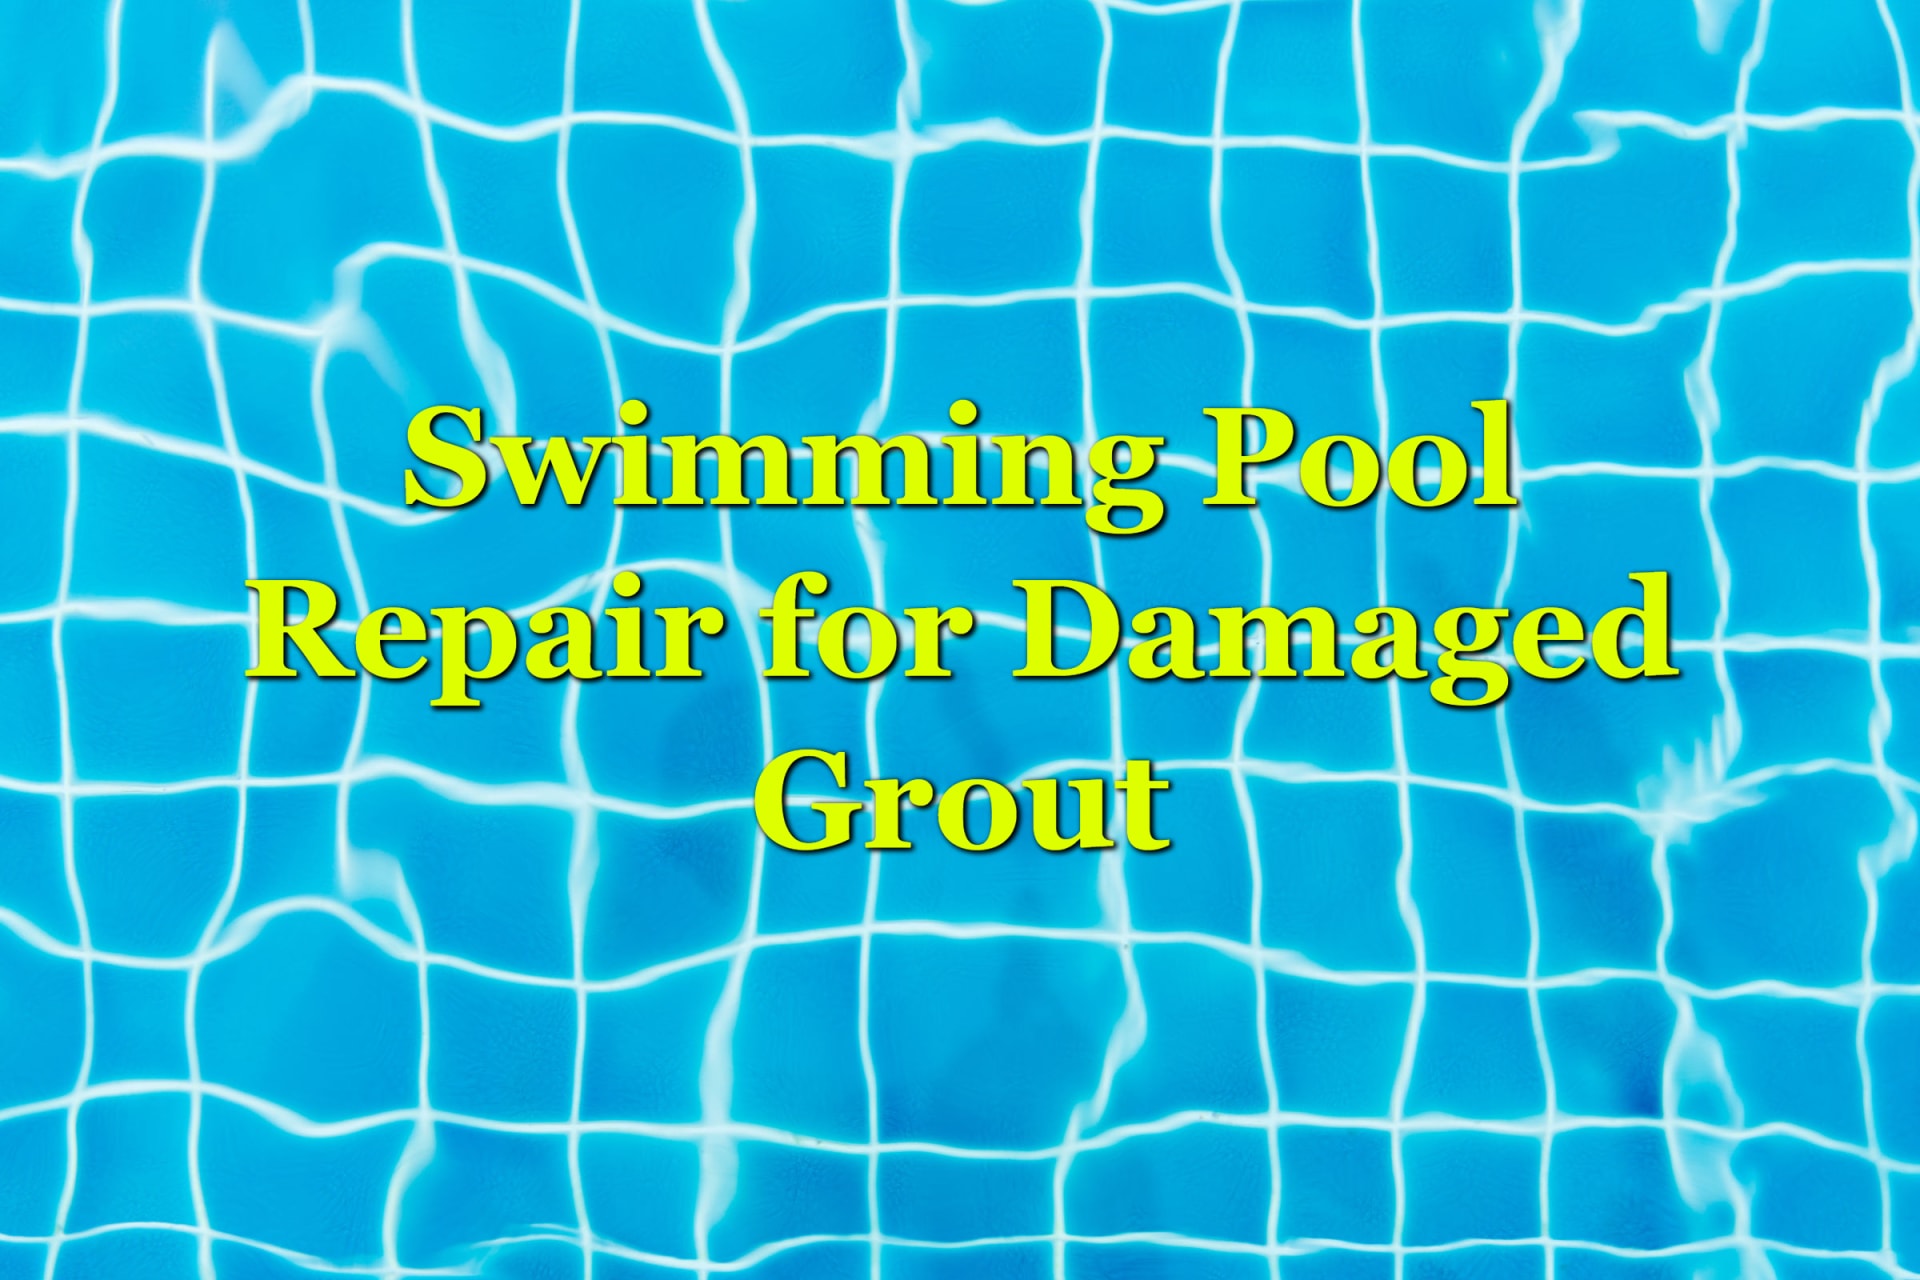 Swimming Pool Repair for Damaged Grout